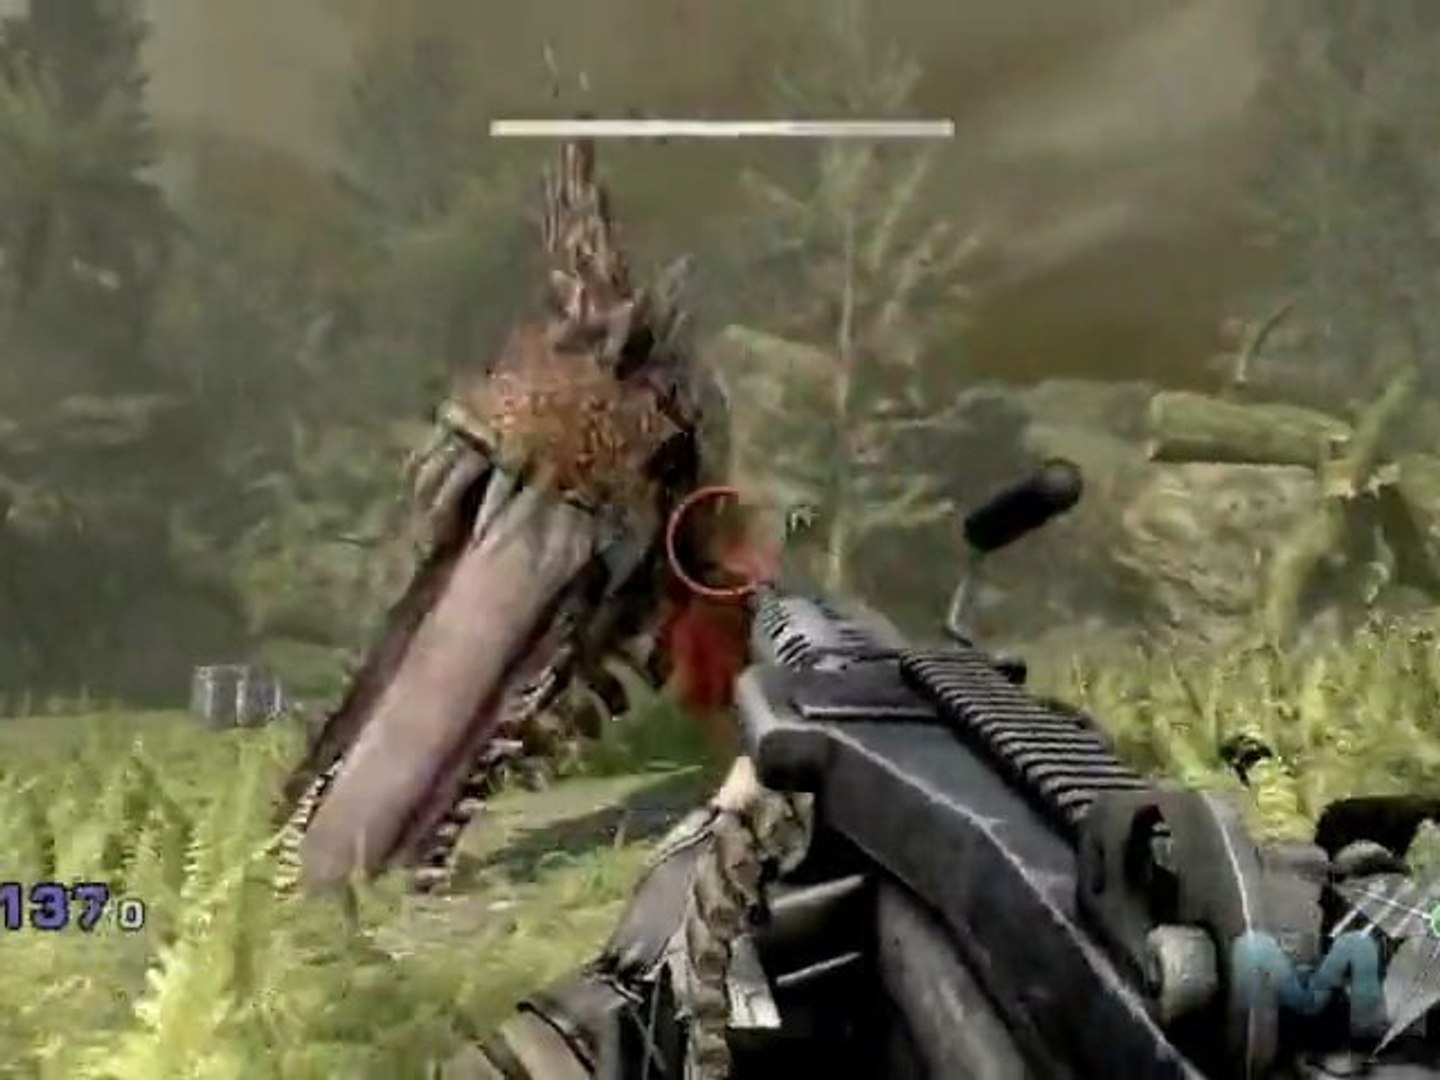 Jurassic: The Hunted - Level 11: Enter: "Spike" - video Dailymotion